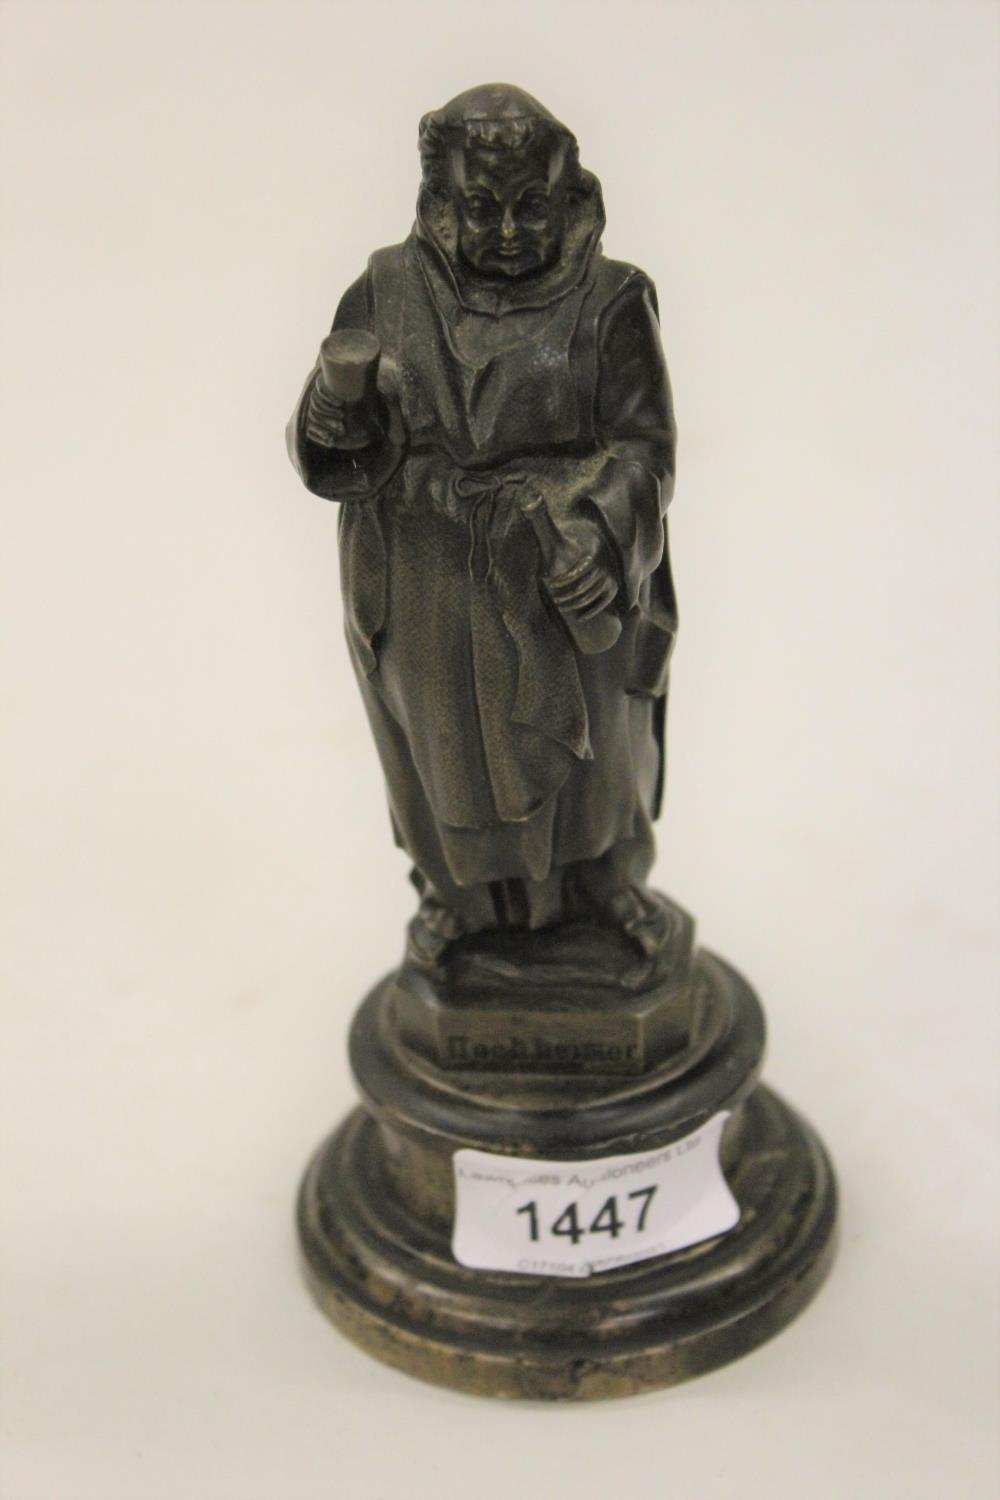 Small brown patinated bronze figure of a monk taking wine inscribed Hochheimer, mounted on a